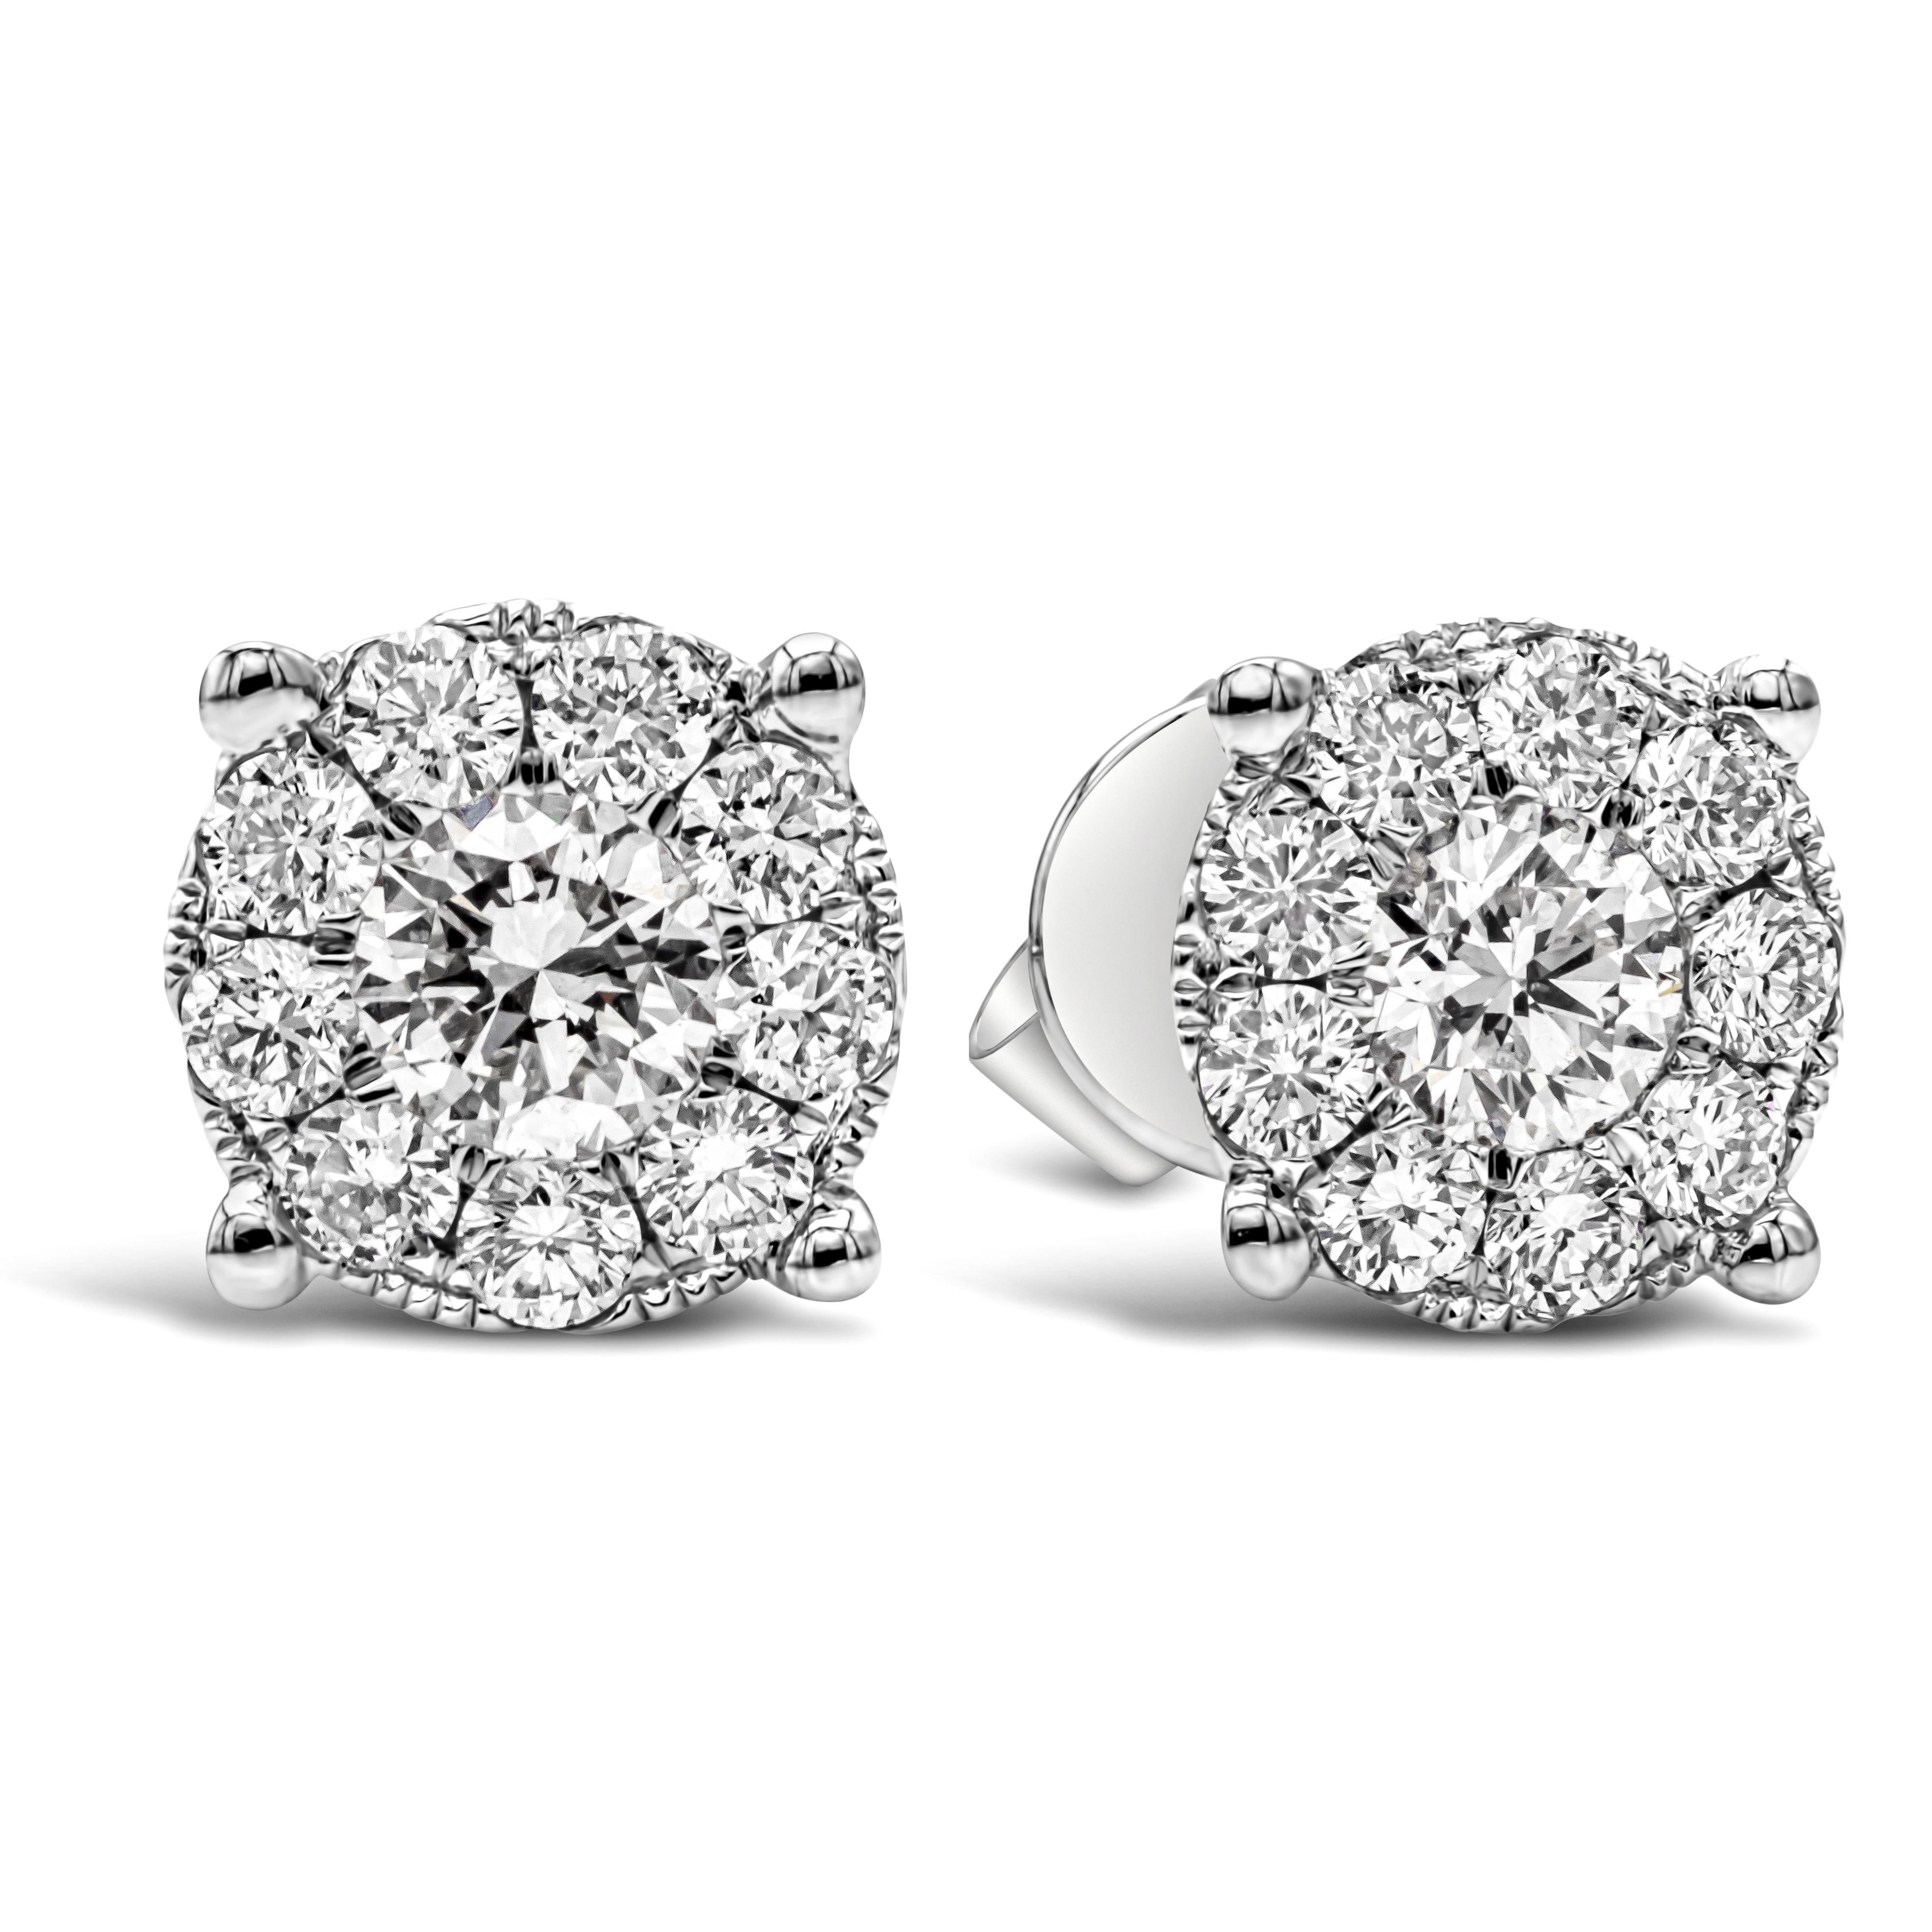 A classic pair of stud earrings showcasing a cluster of 20 round brilliant diamonds set in an 18k white gold. Diamonds weigh 0.21 carats total and are approximately F-G- color, VS-SI in clarity. 4.60mm diameter.

Roman Malakov is a custom house,